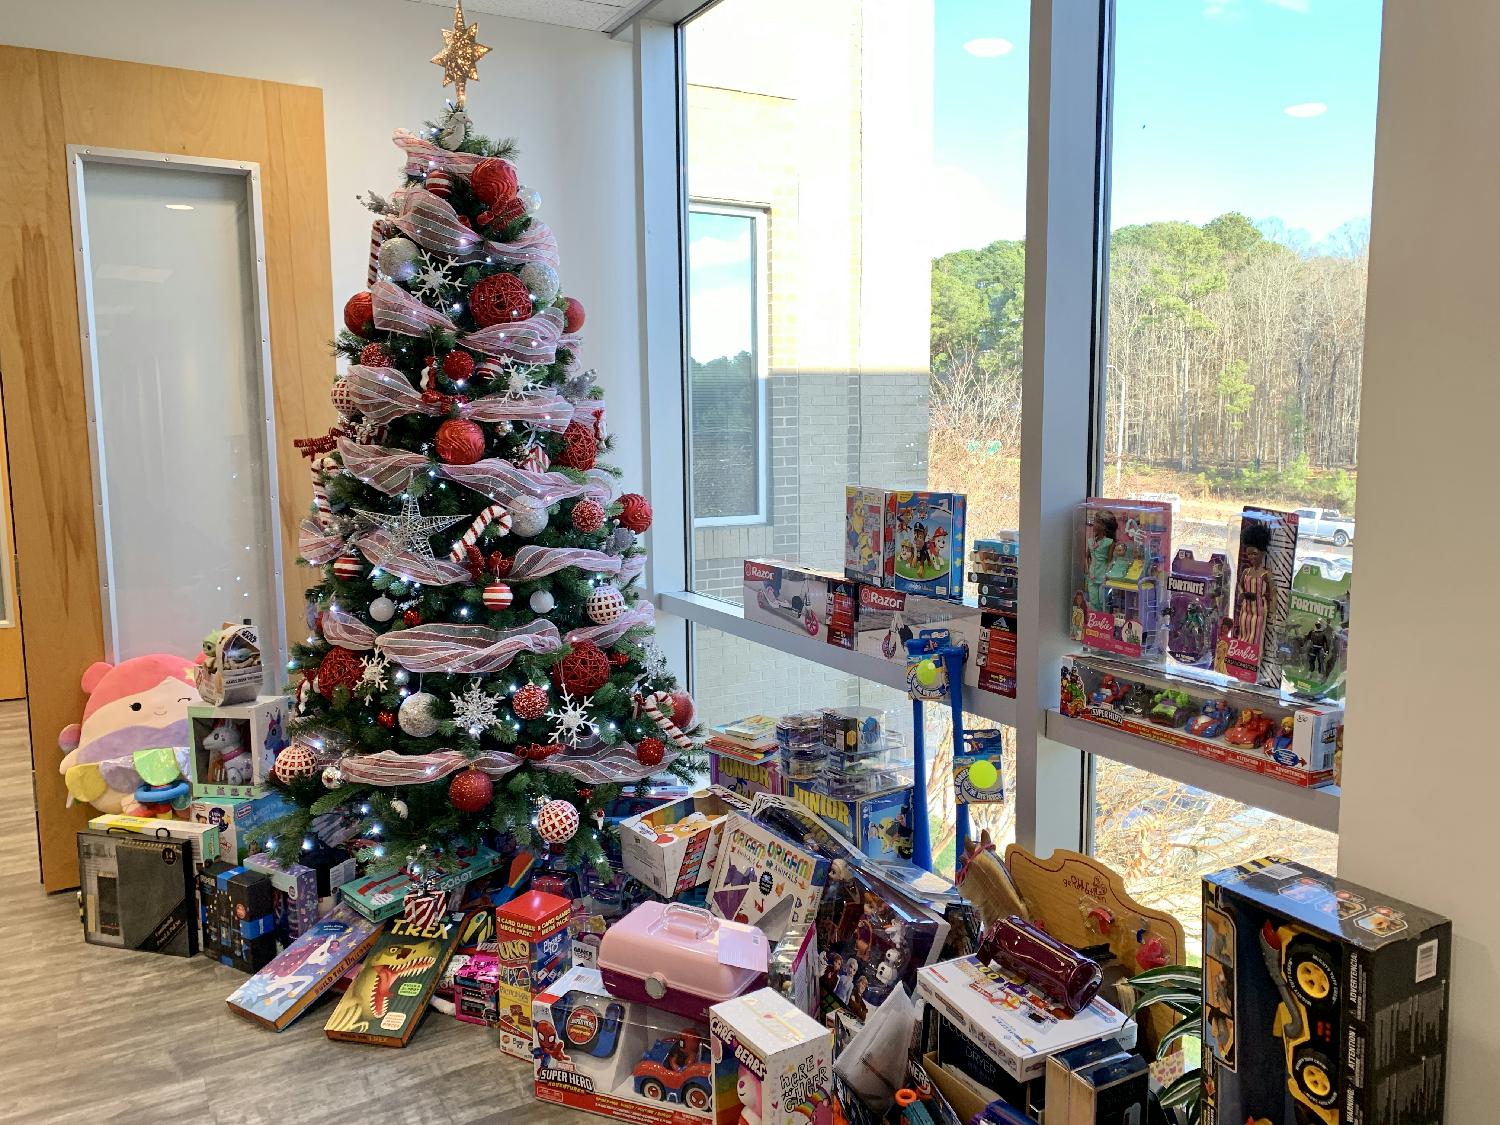 Toys for Tots annual company donation